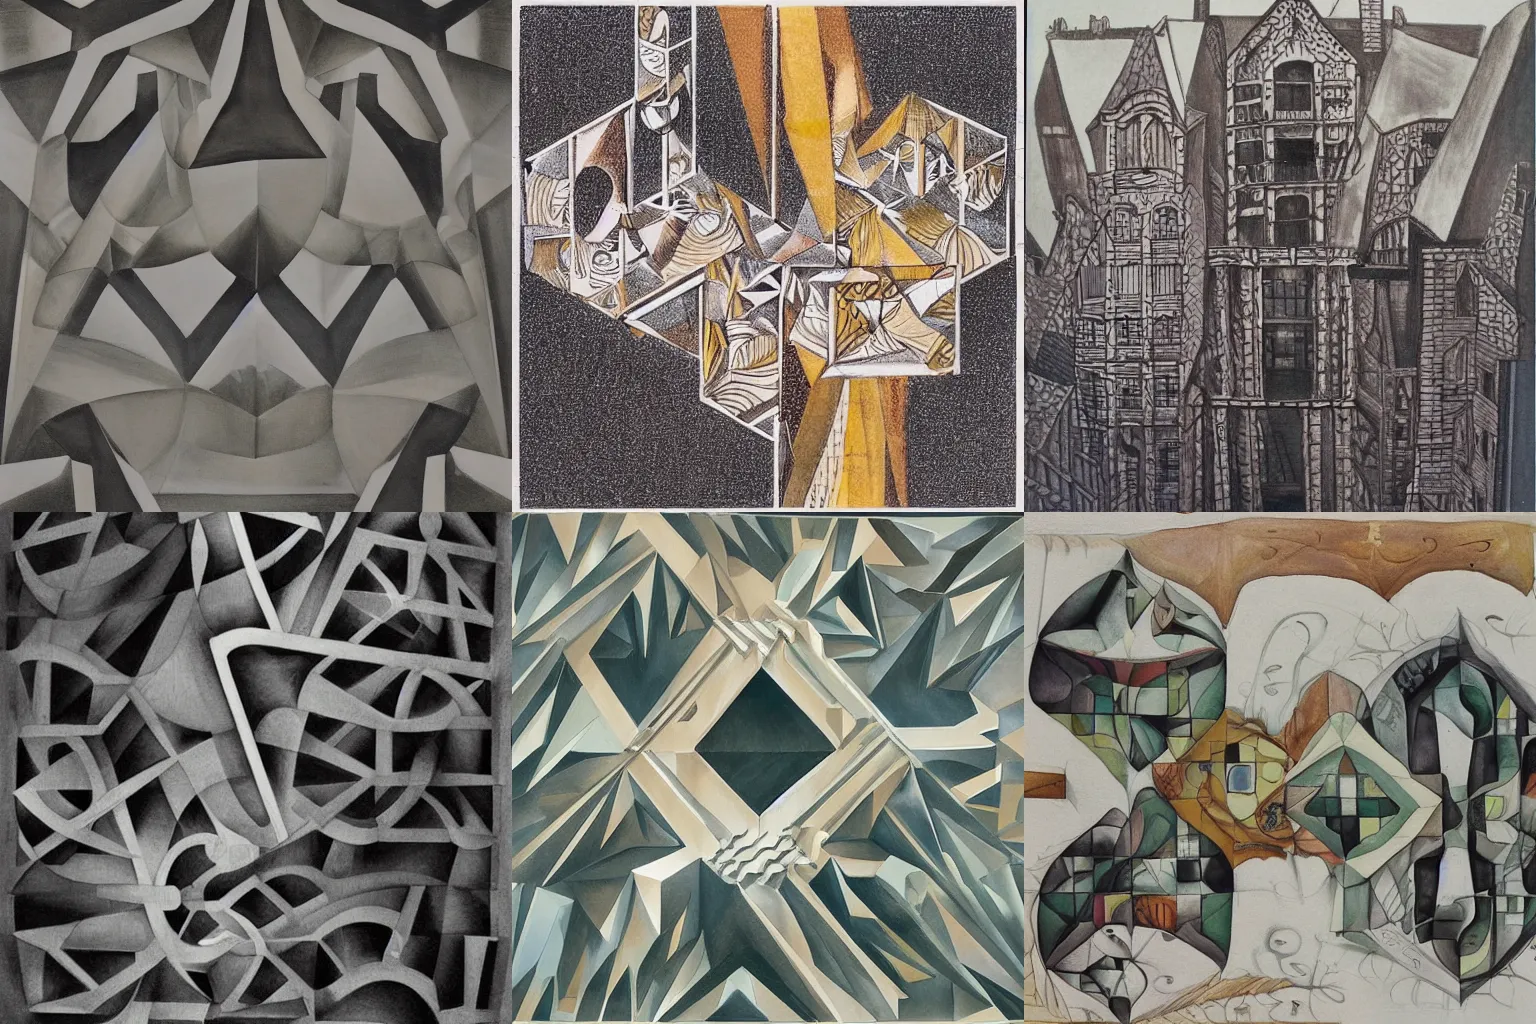 Prompt: incredible geometric art by M. C. Escher, watercolour and pencil on paper